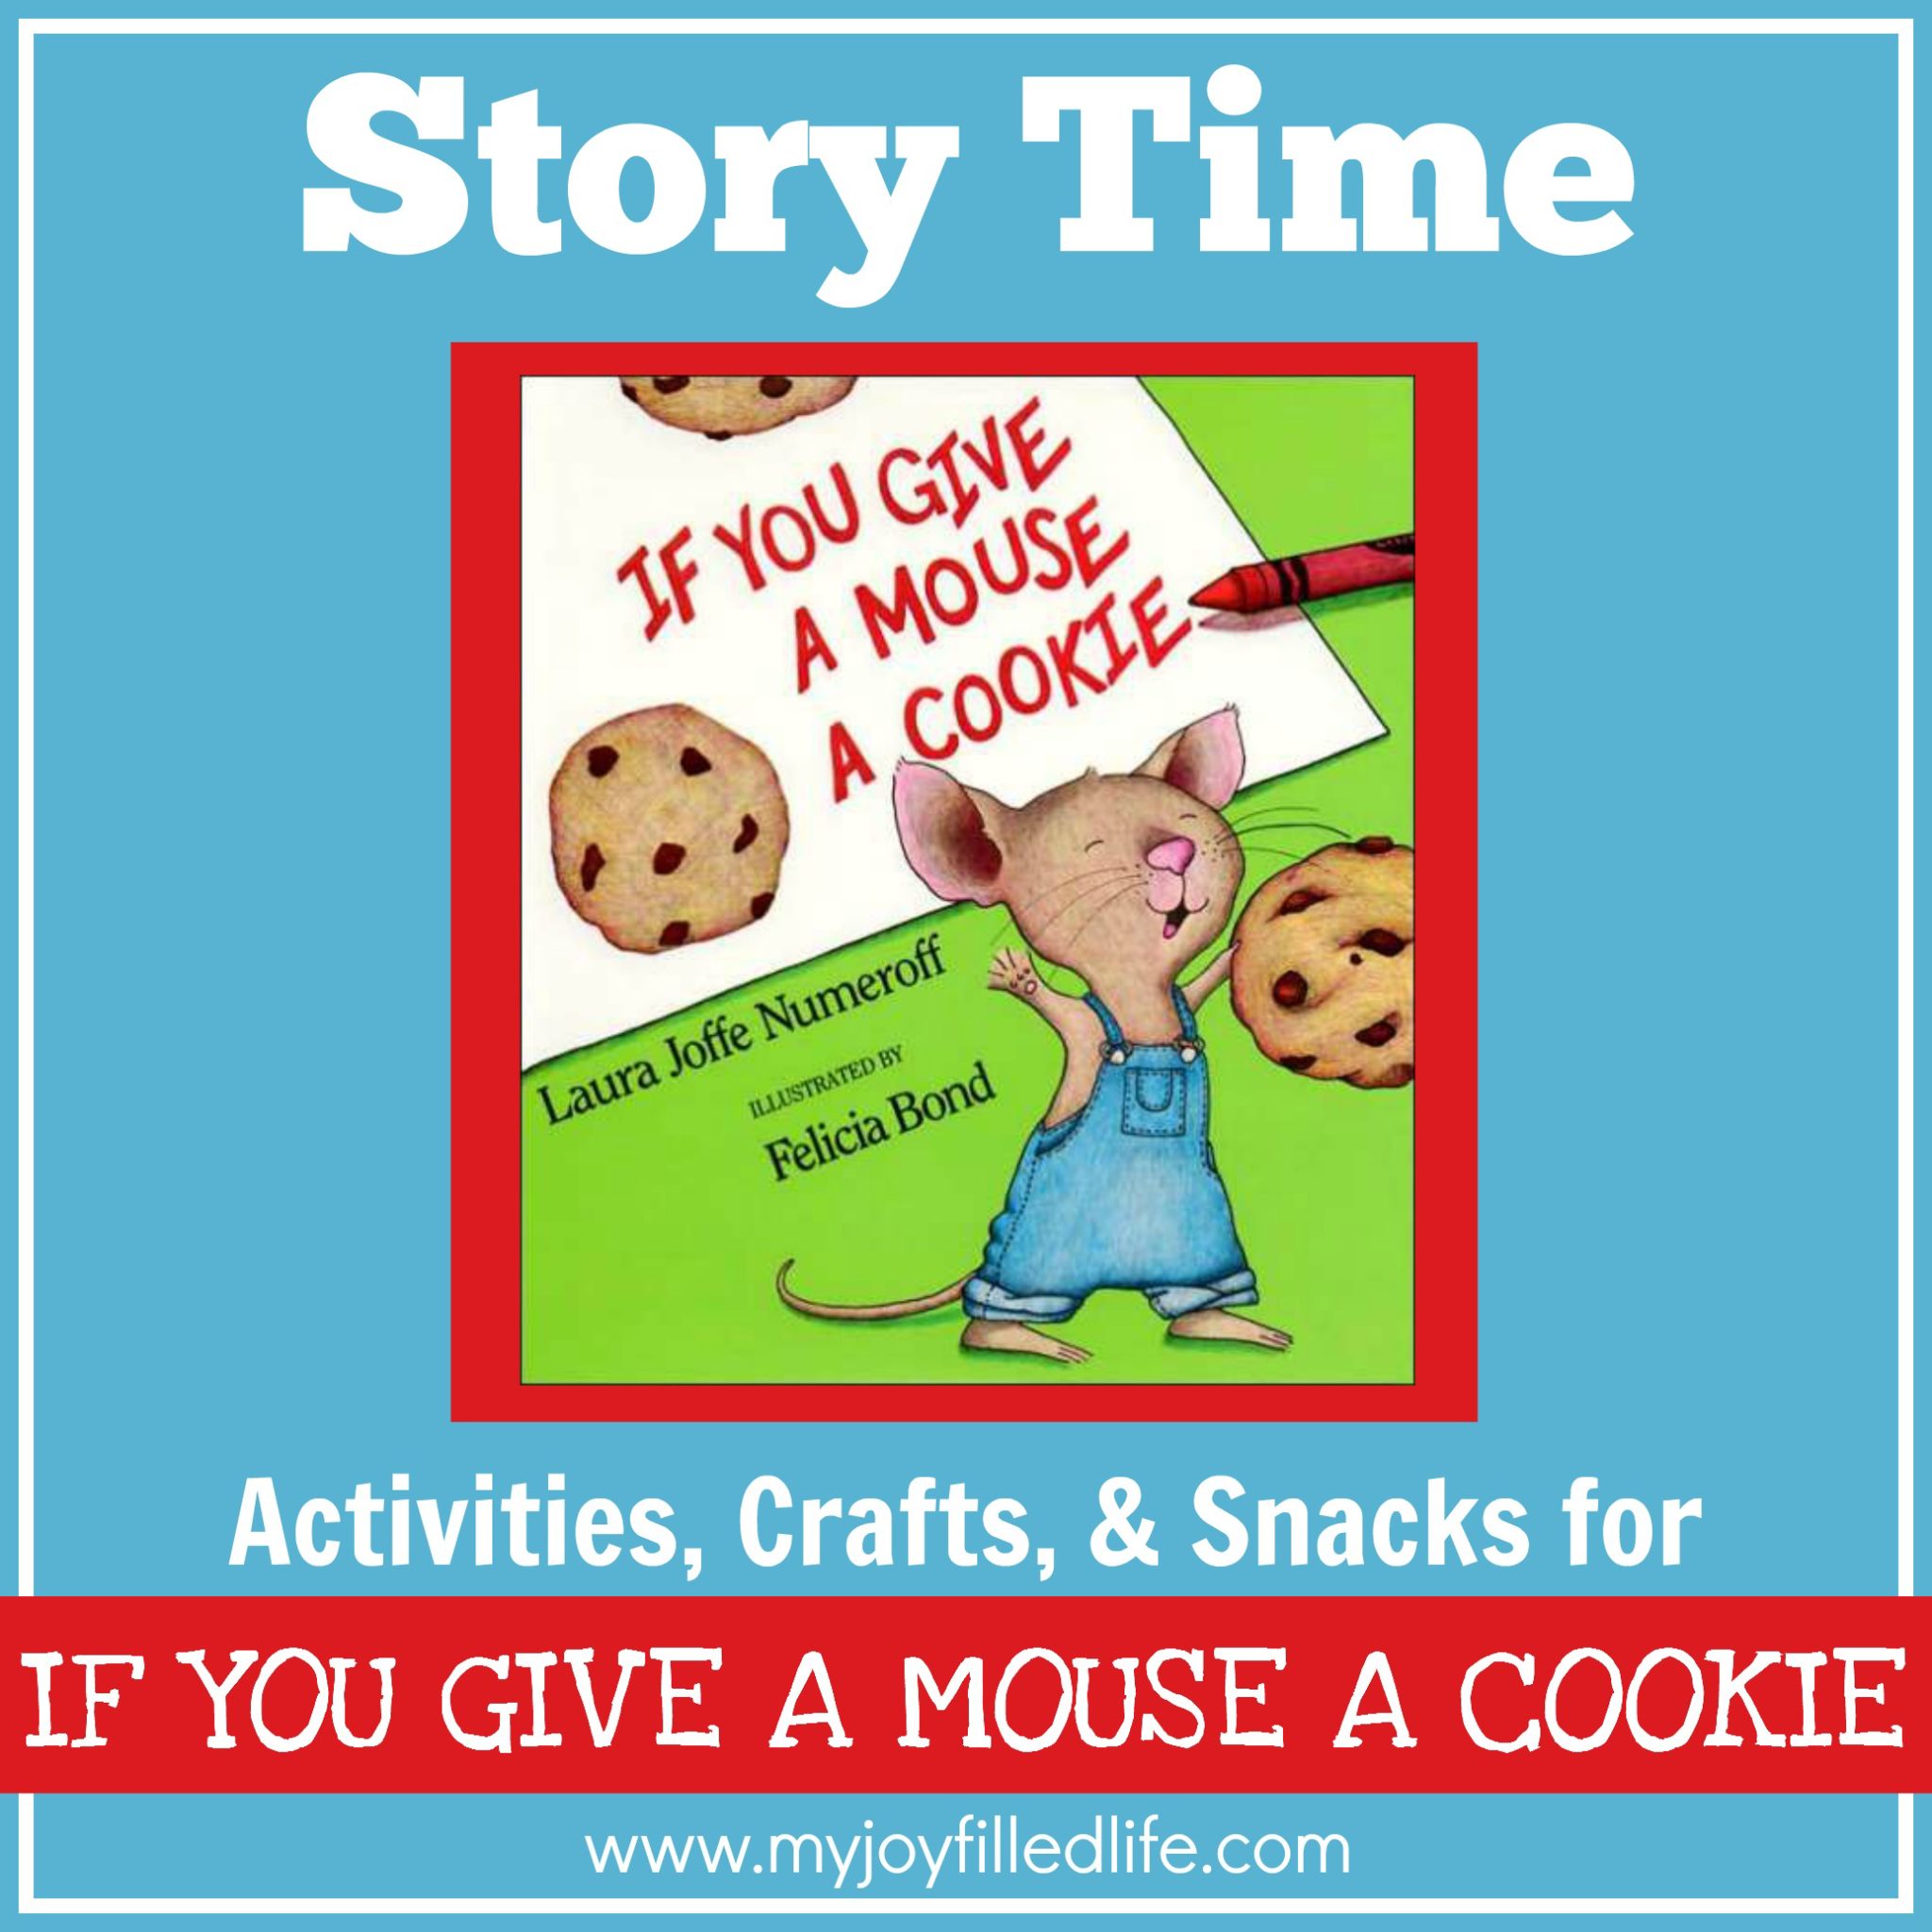 If You Give a Mouse a Cookie - Story Time Activities - My Joy-Filled Life